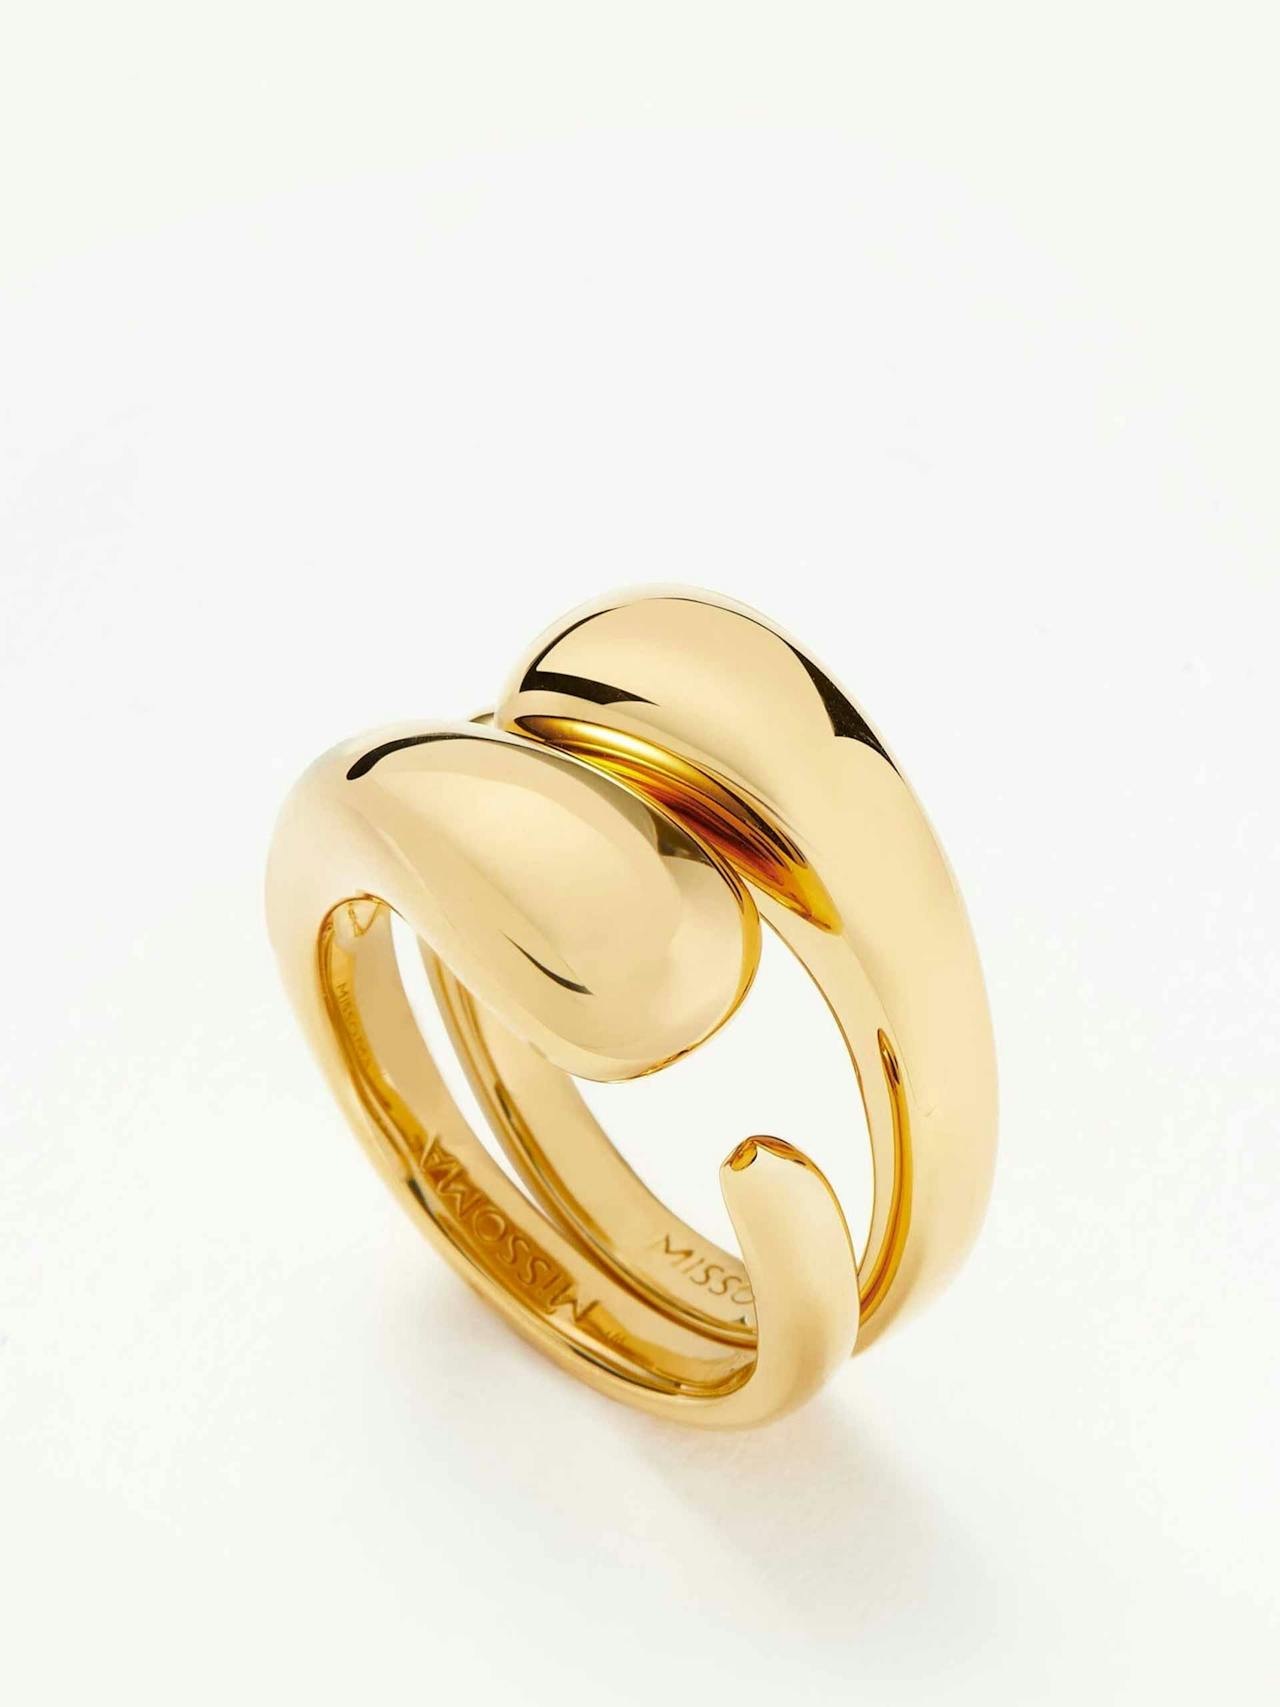 Molten double stacking ring set